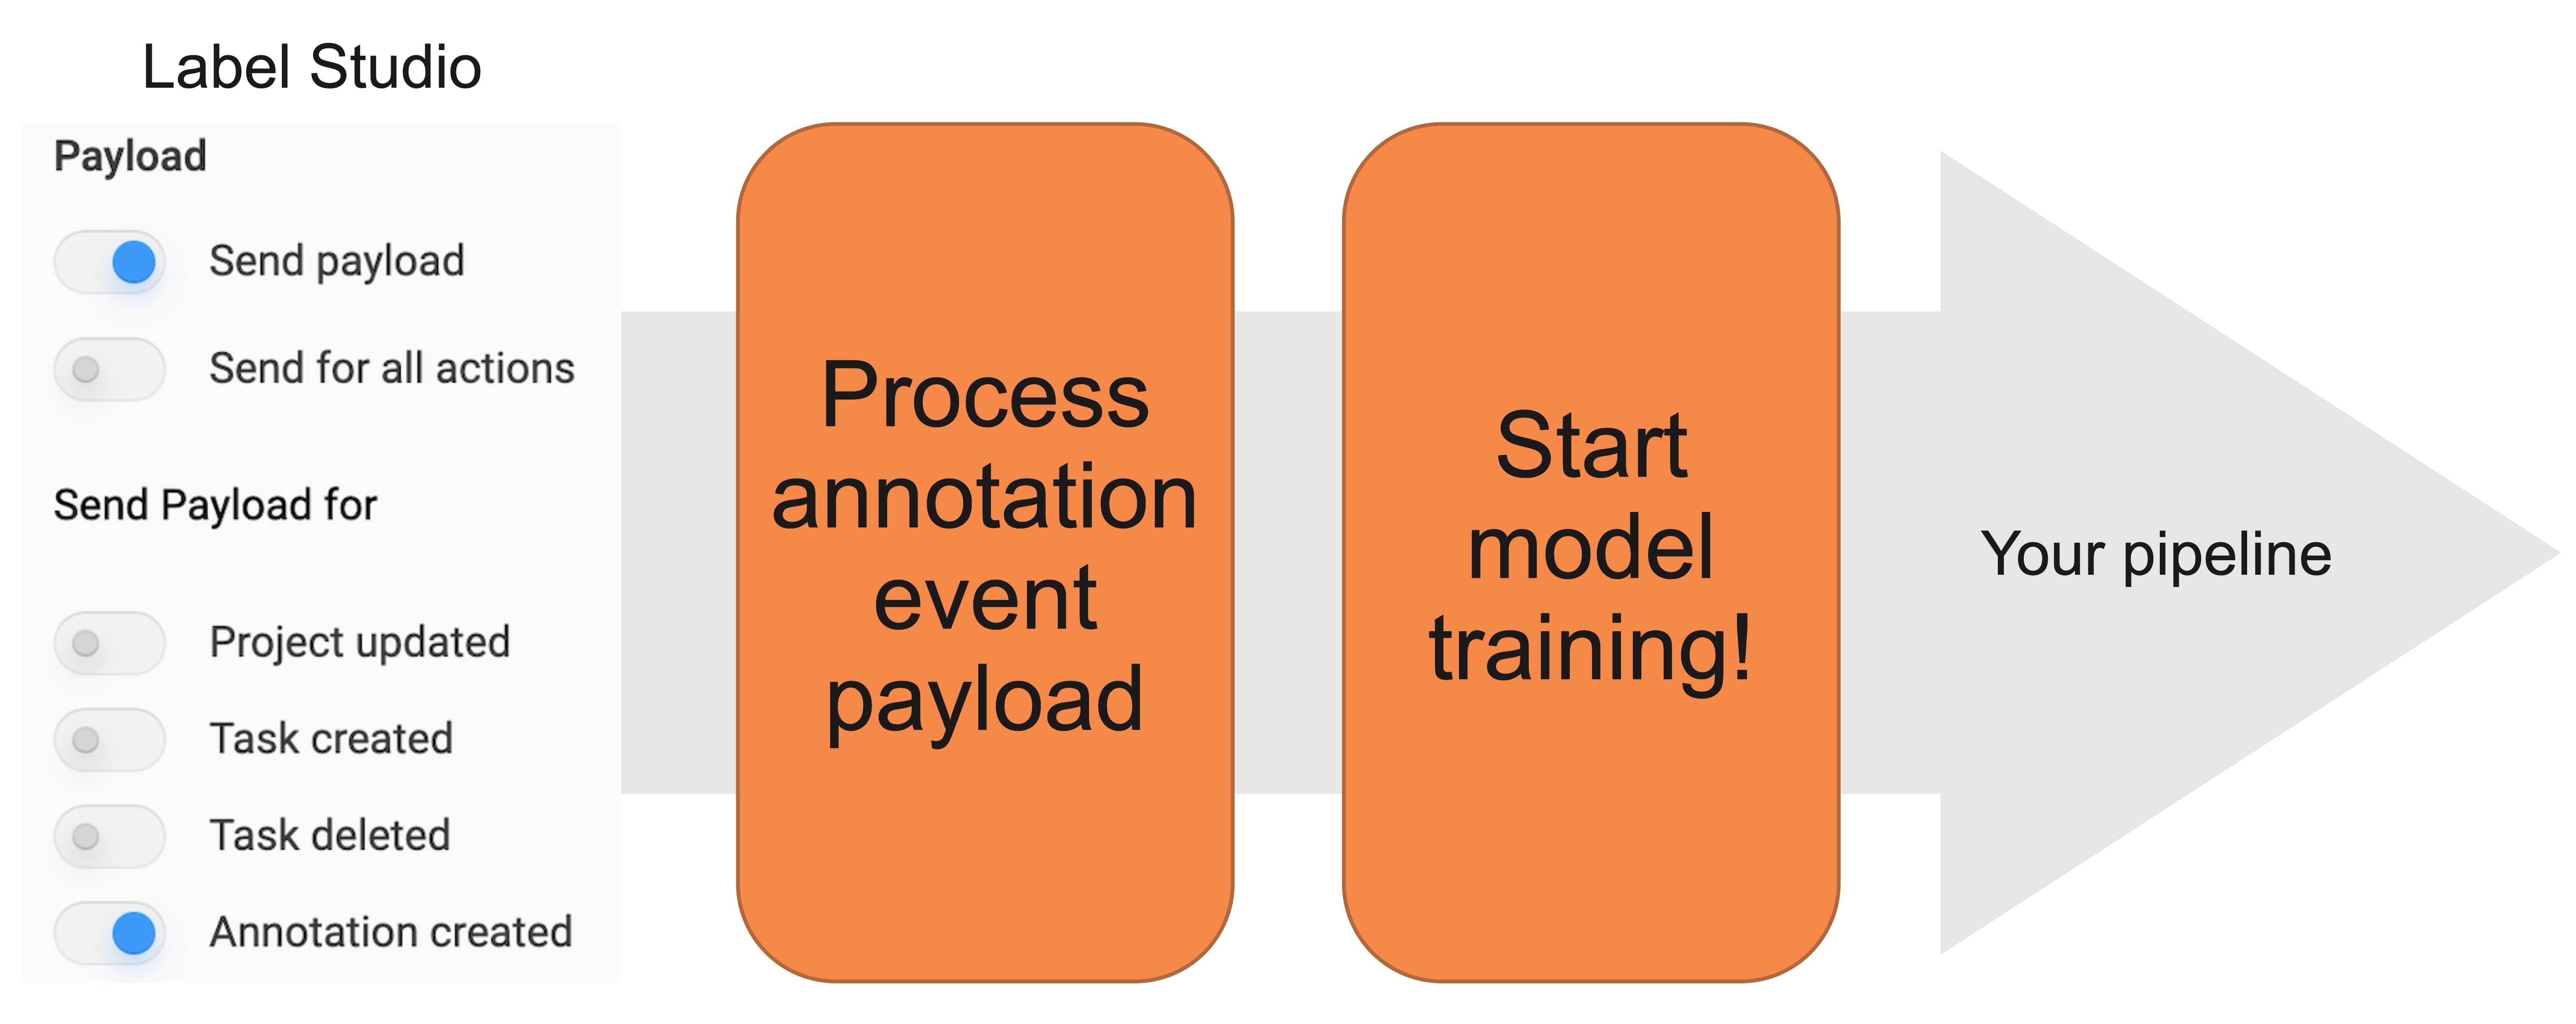 Diagram showing selecting webhook payload in Label Studio and processing the event payload and starting model training in your own pipeline